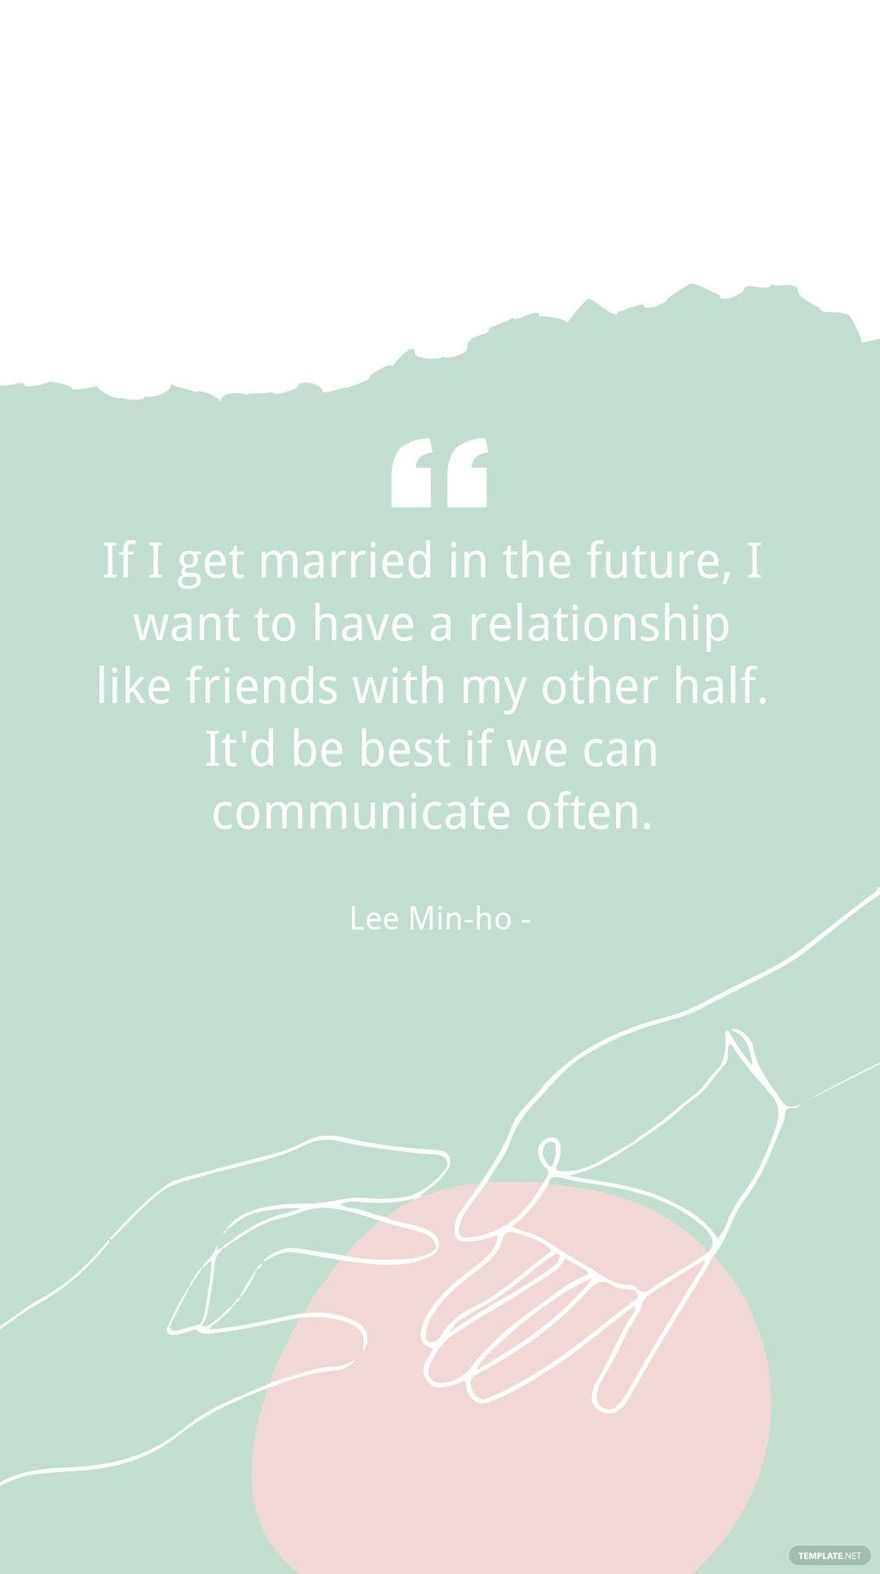 Lee Min-ho - If I get married in the future, I want to have a relationship like friends with my other half. It'd be best if we can communicate often.